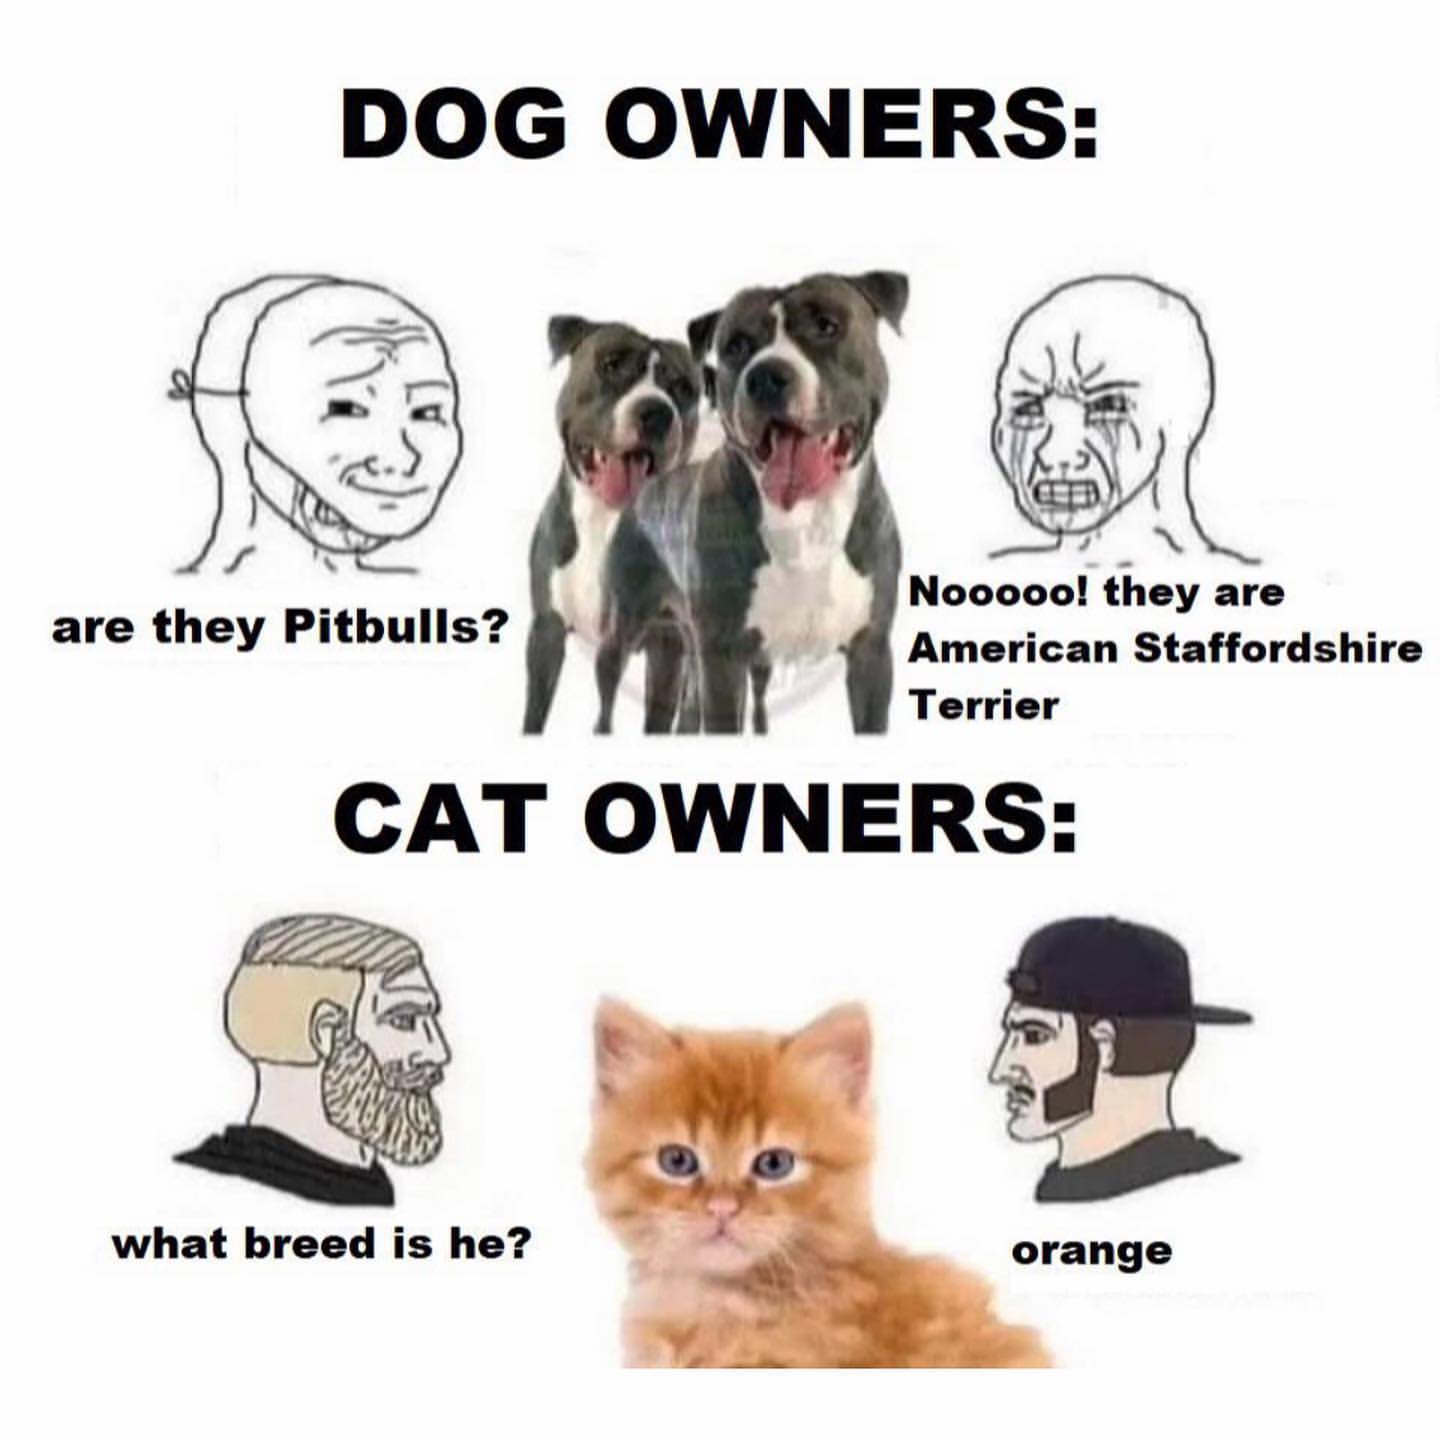 Dog owners: Are they Pitbulls? Nooooo! they are American Staffordshire Terrier. Cat owners: What bread is he? Orange.